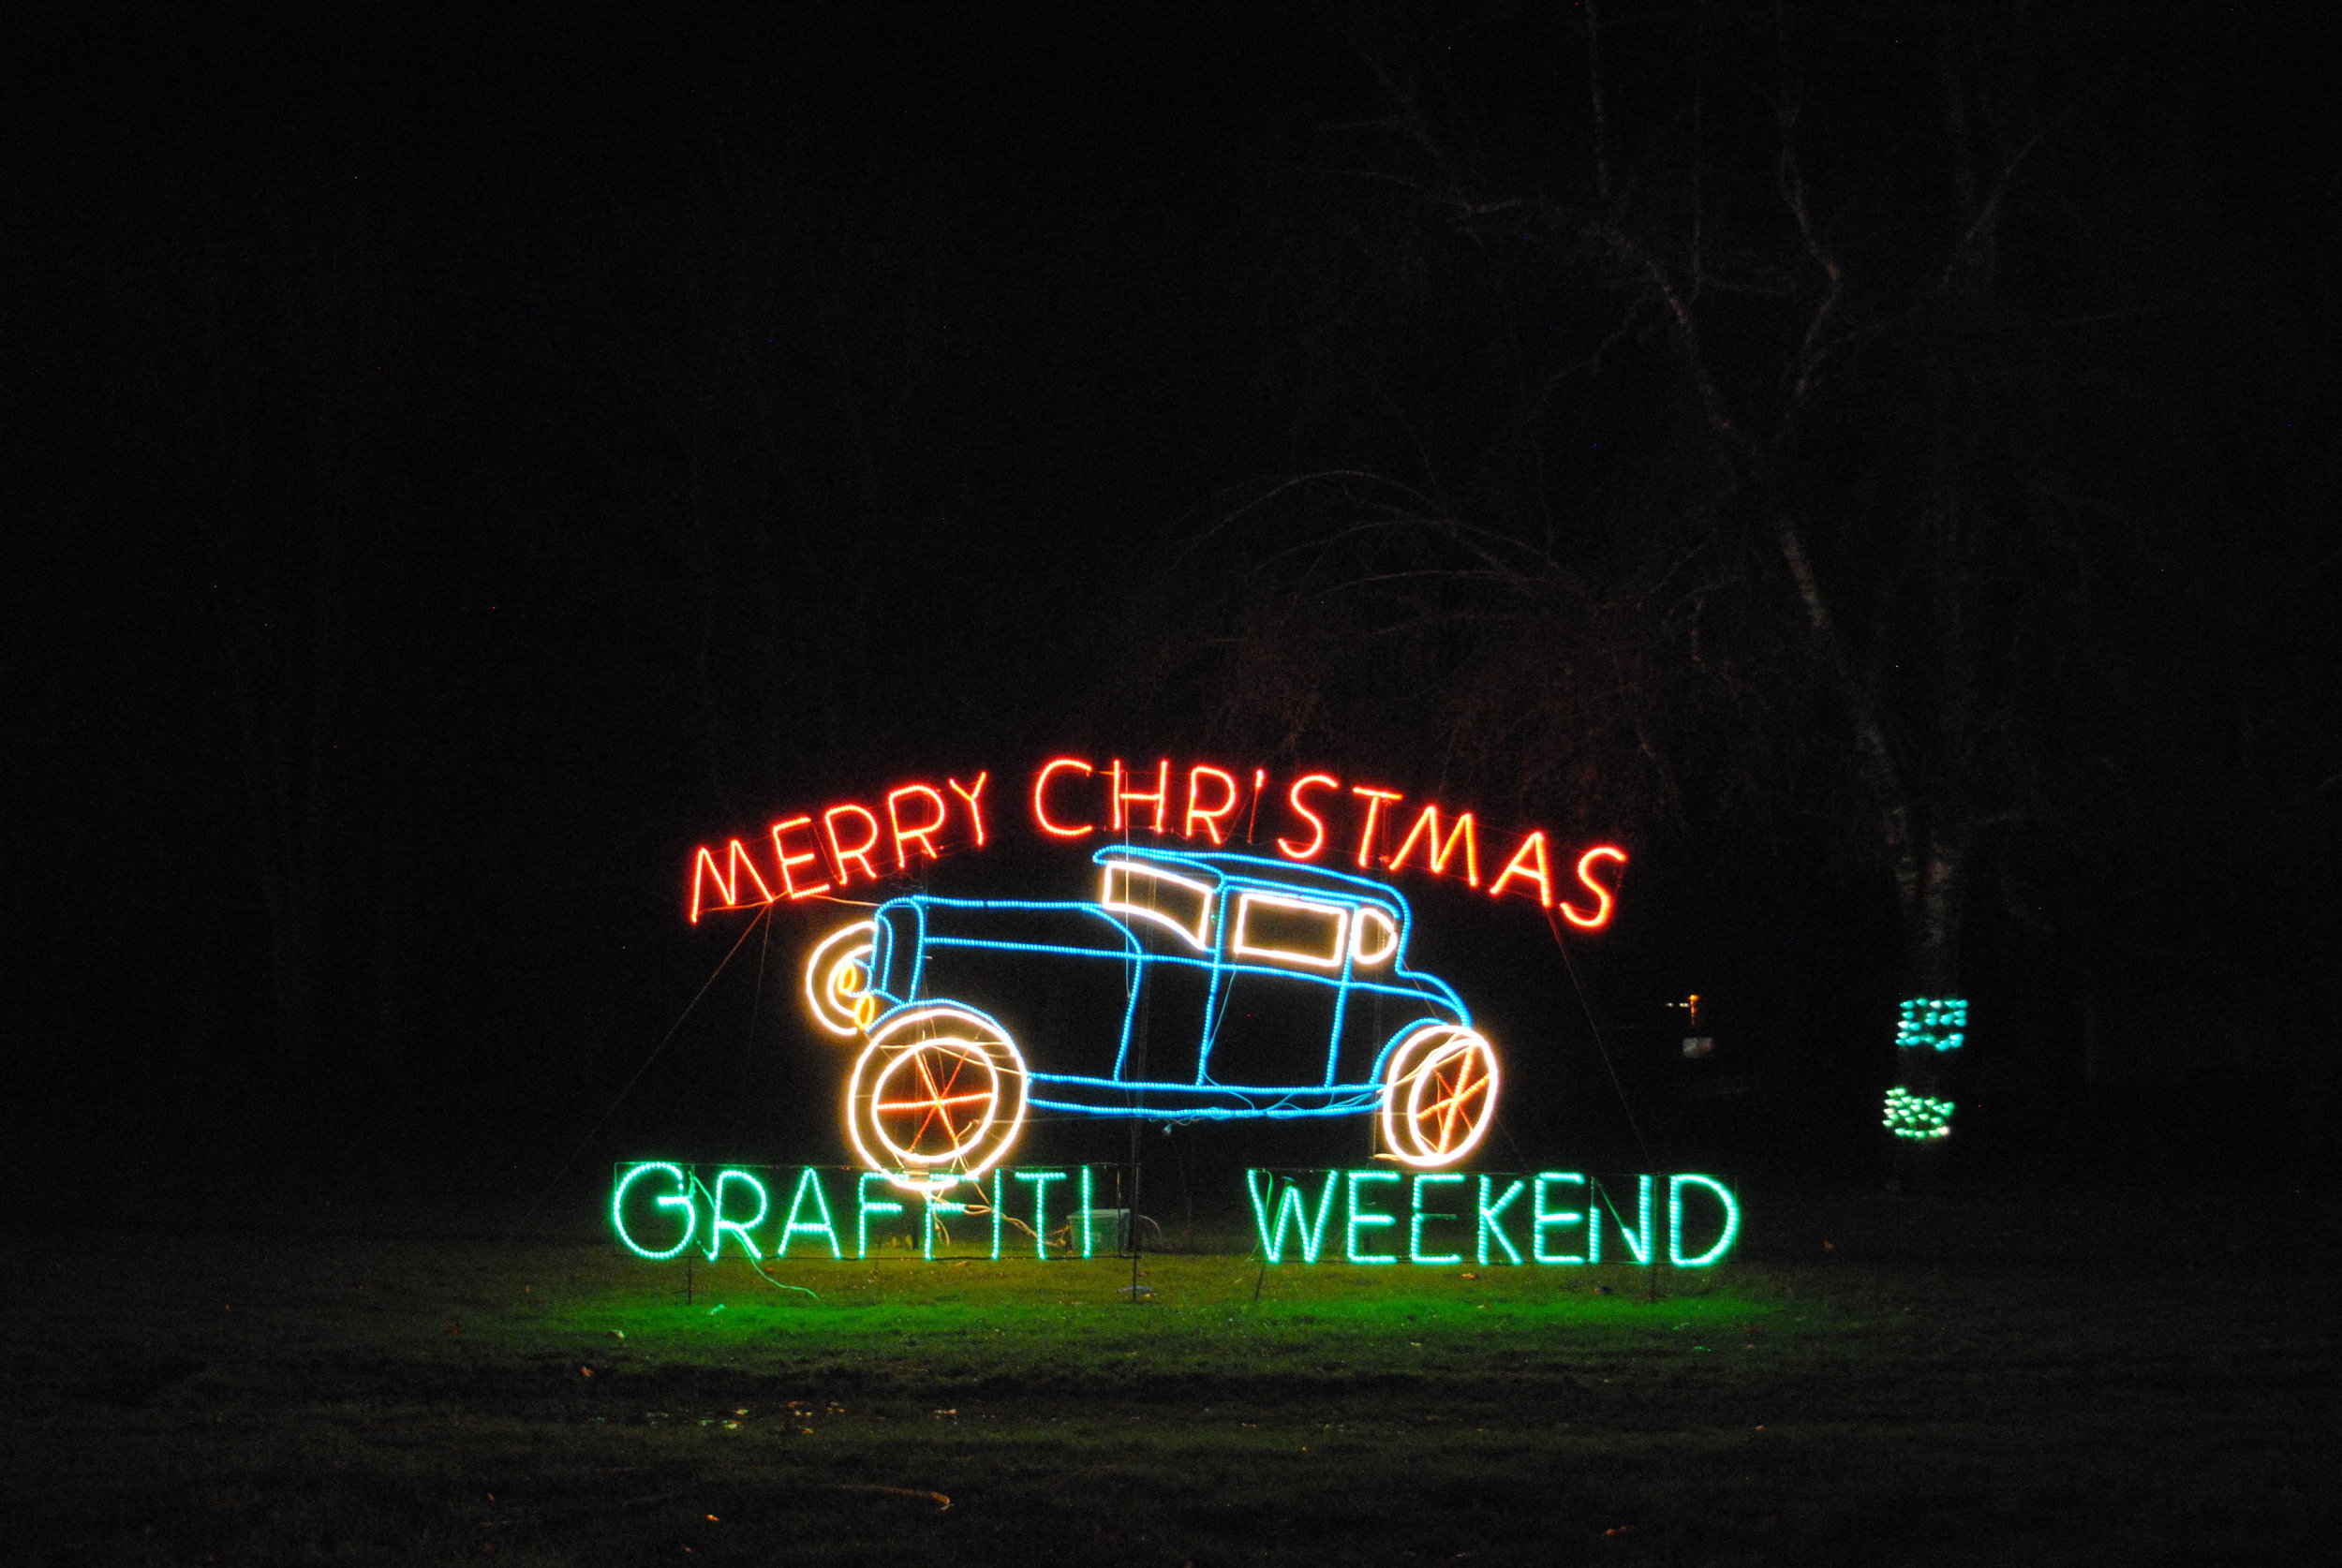 Umpqua Valley Festival of Lights - Roseburg - What to do in Southern Oregon